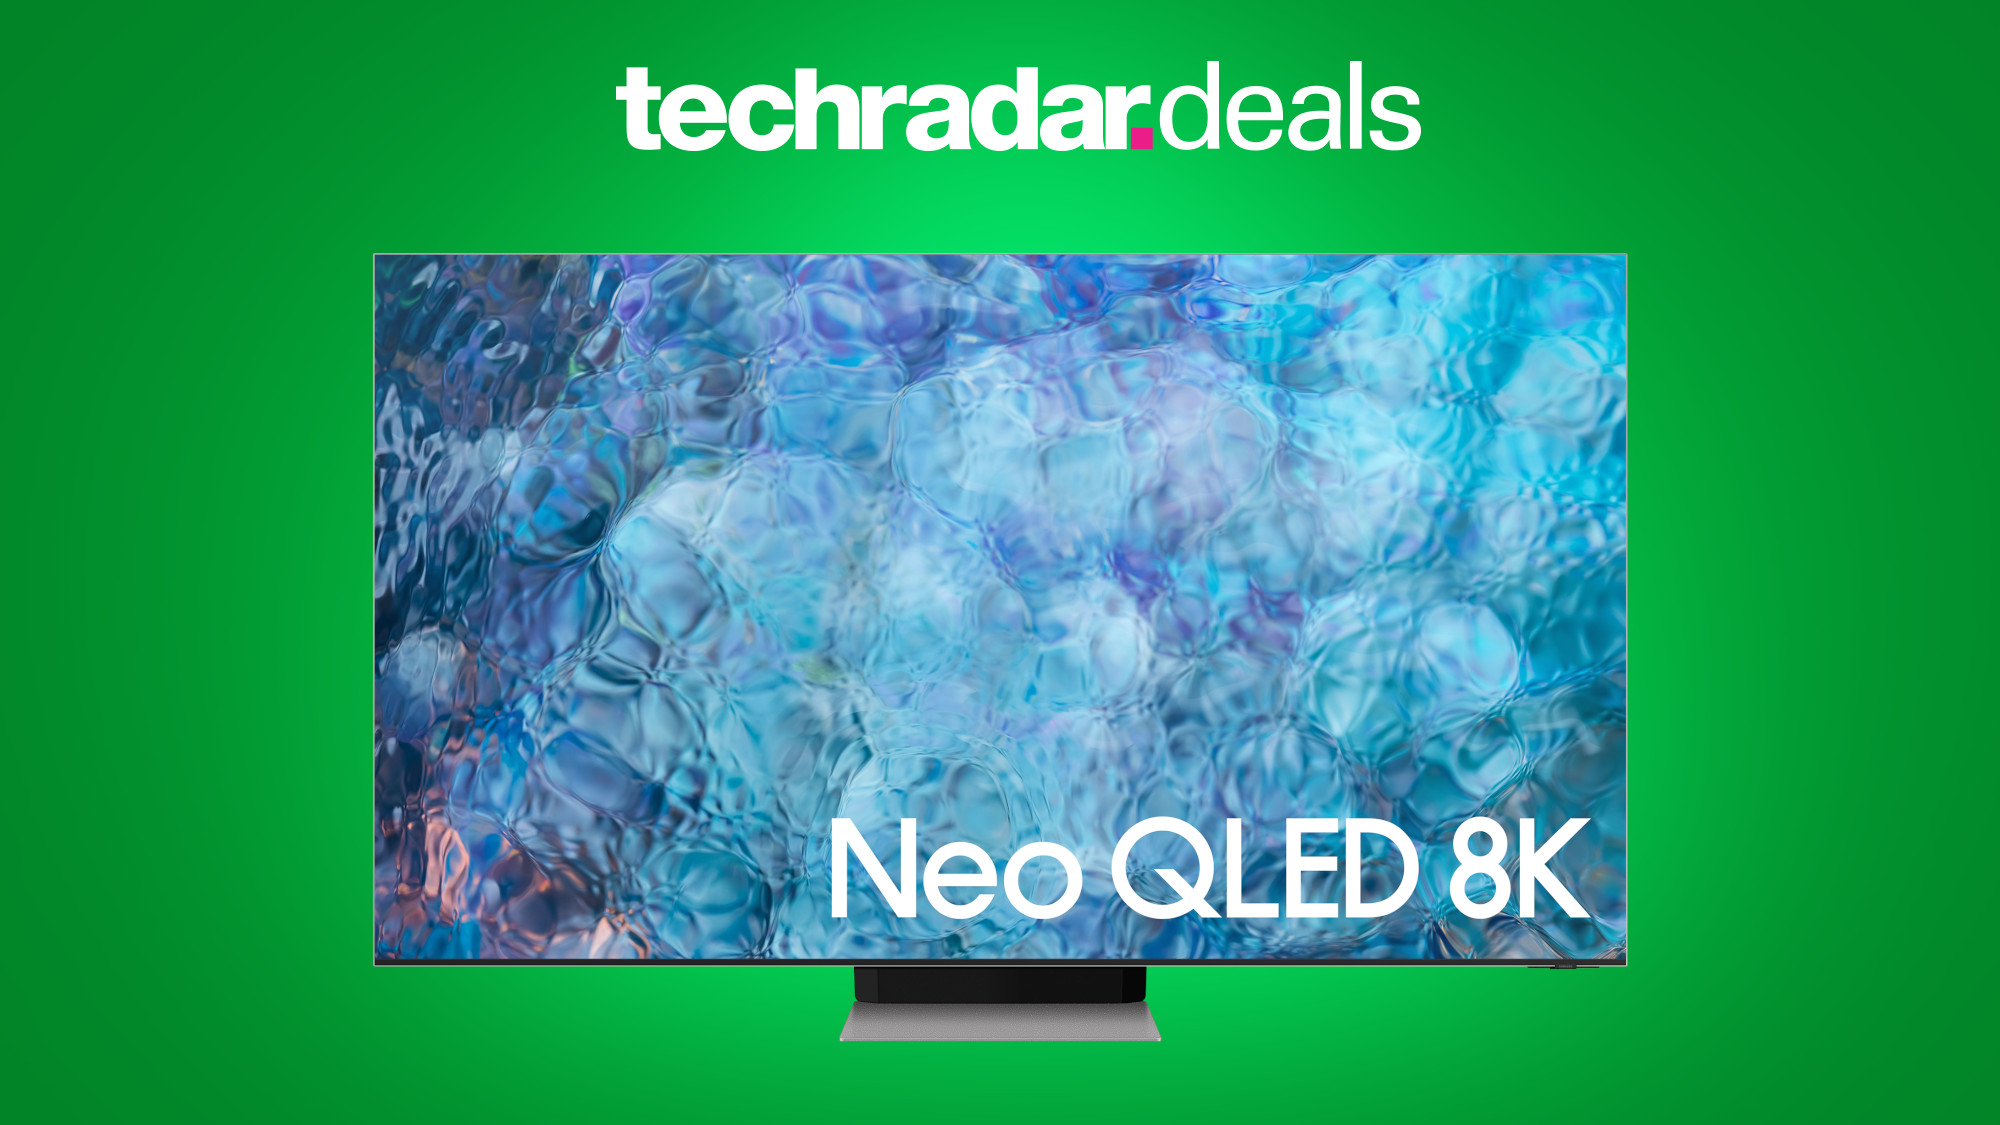 Image: Samsung QN900A Neo QLED 8K TV on a green background